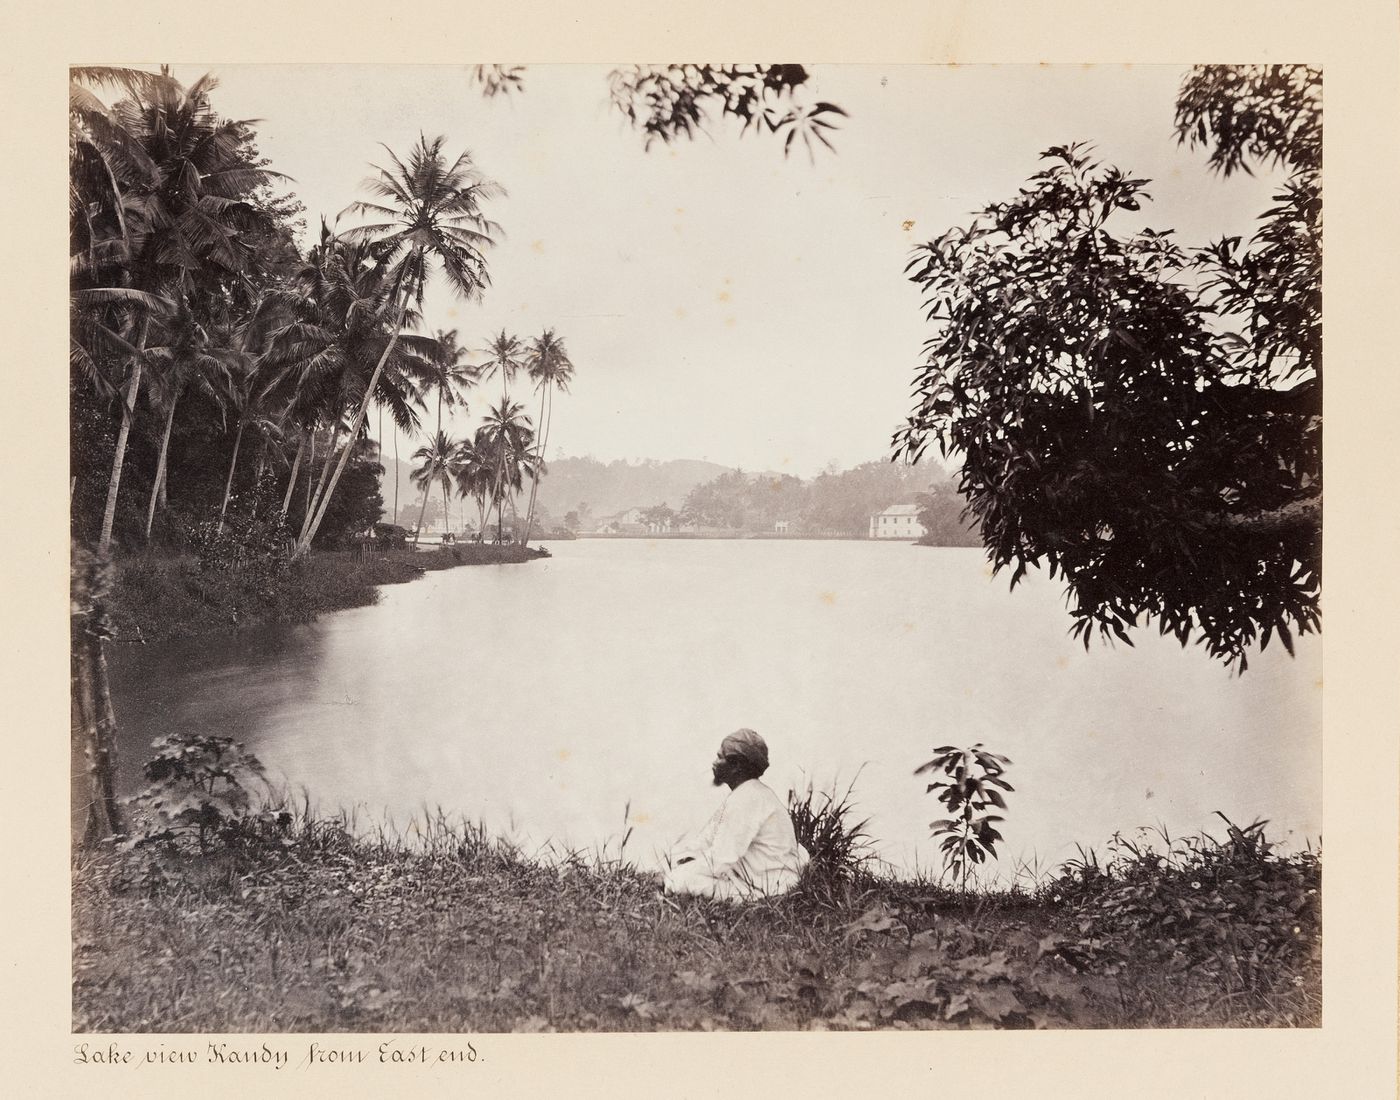 View of Kandy Lake from the east end with a man in the foreground, Kandy, Ceylon (now Sri Lanka)